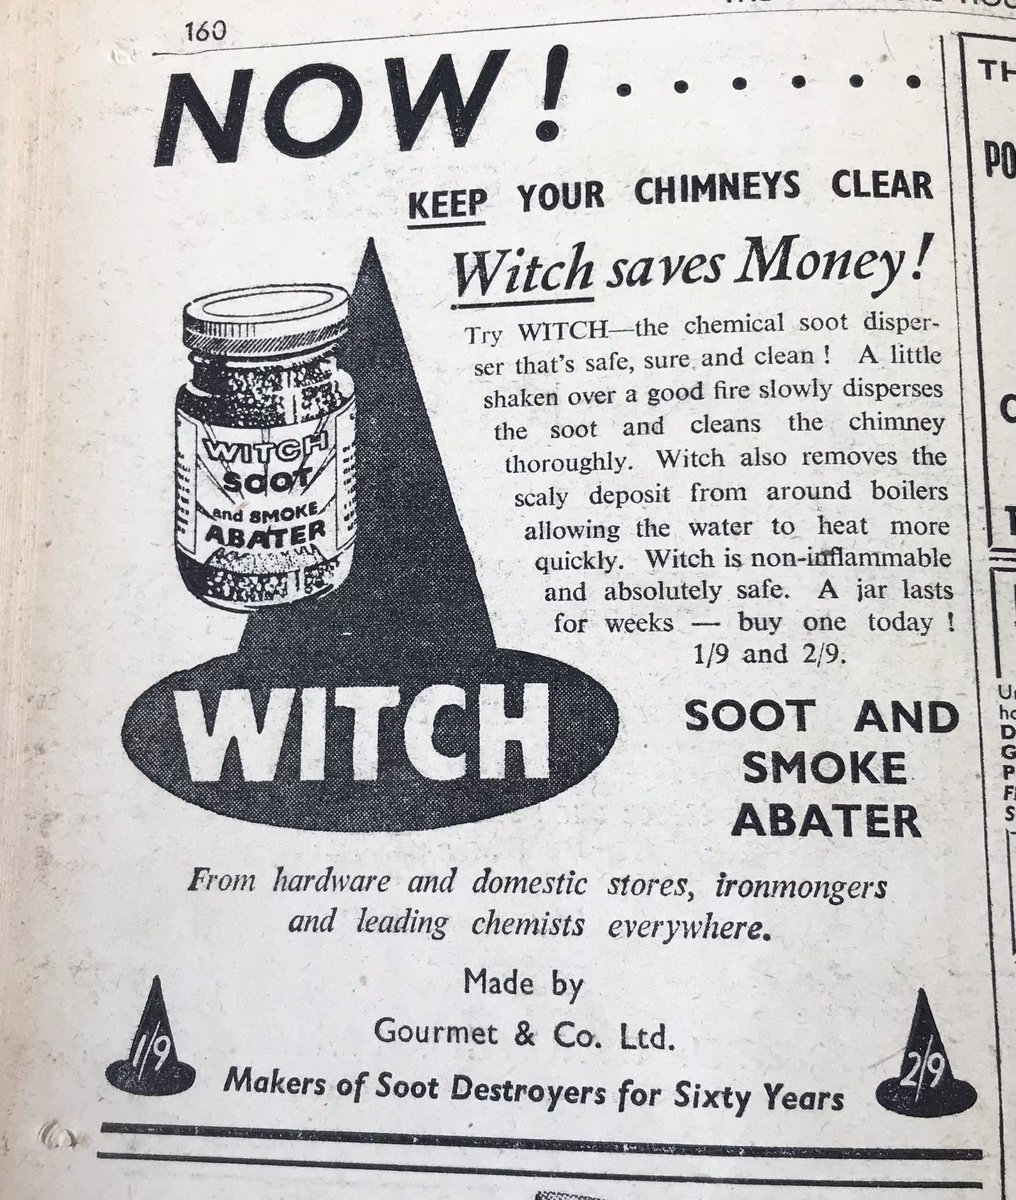 Happy Easter 🐣 And “WITCH saves Money”! A car boot find this morning: a 1957 magazine advert offering a soot and smoke abater